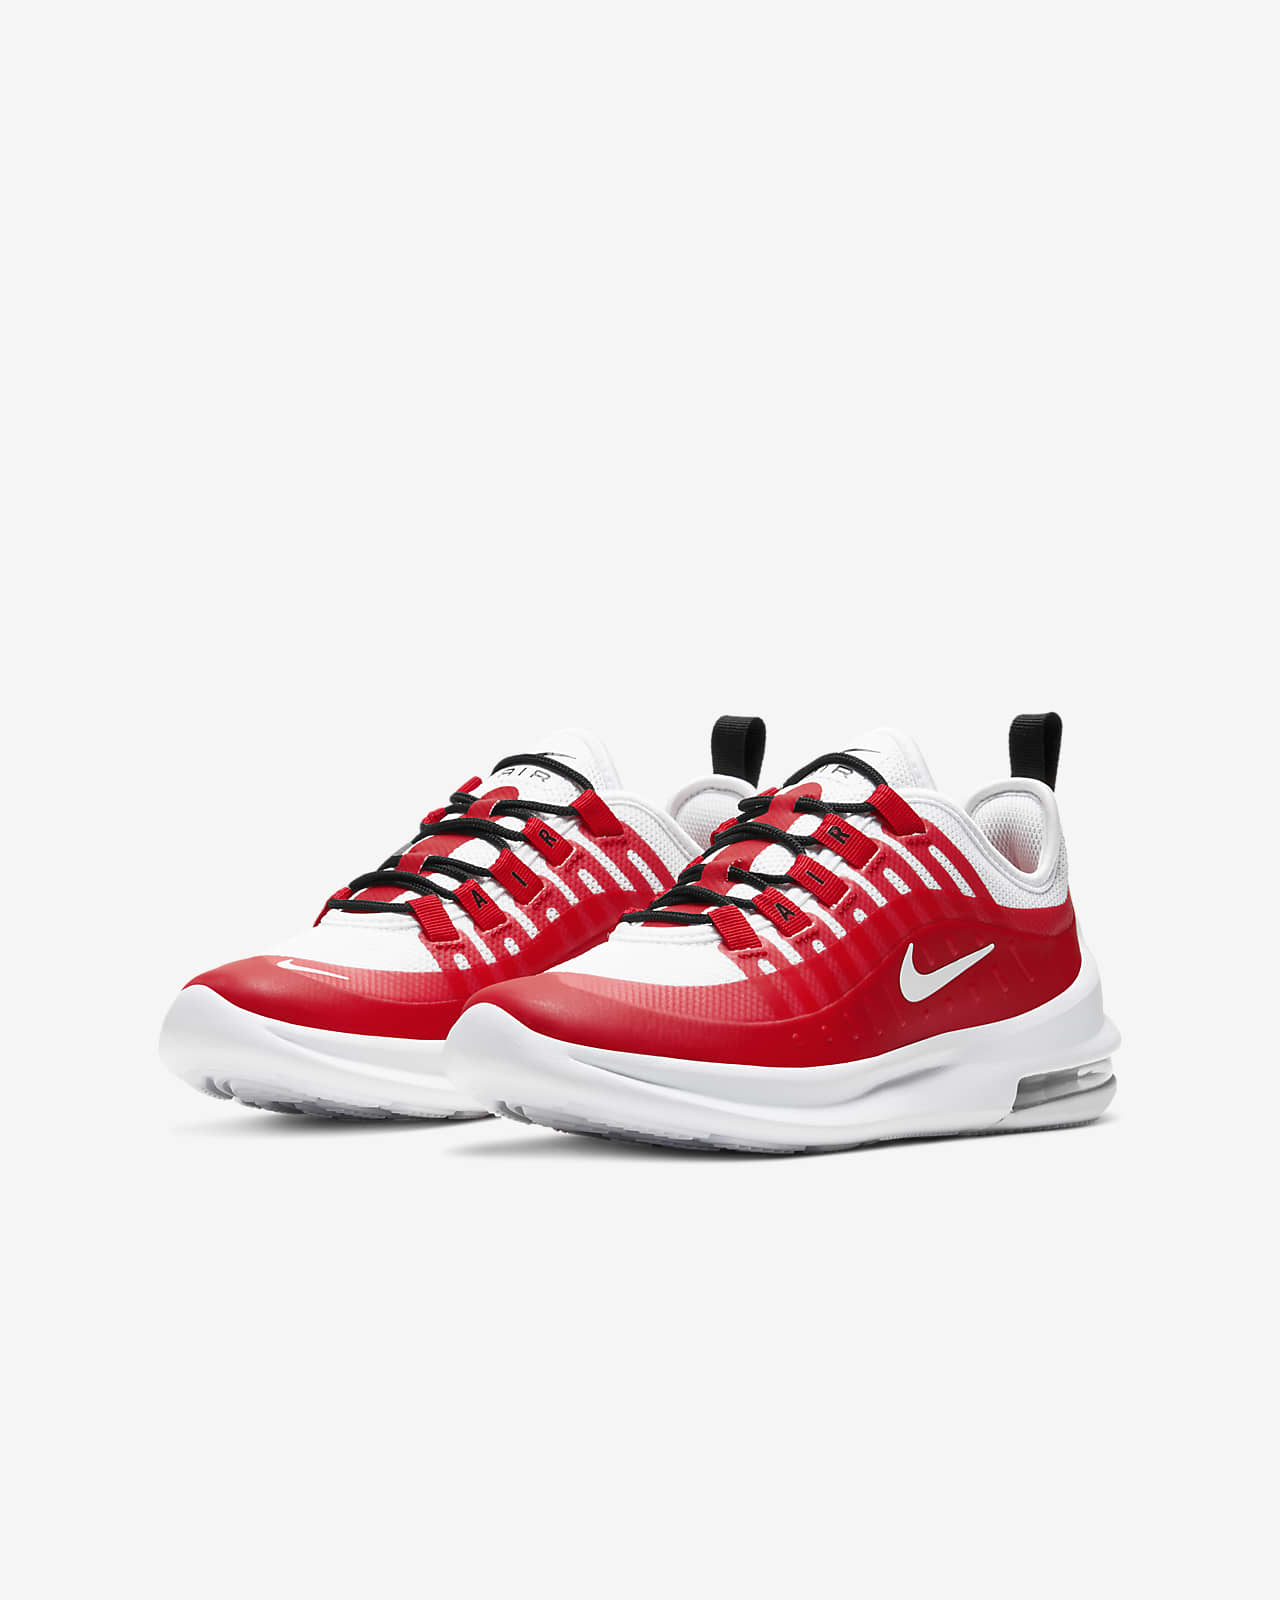 nike axis red